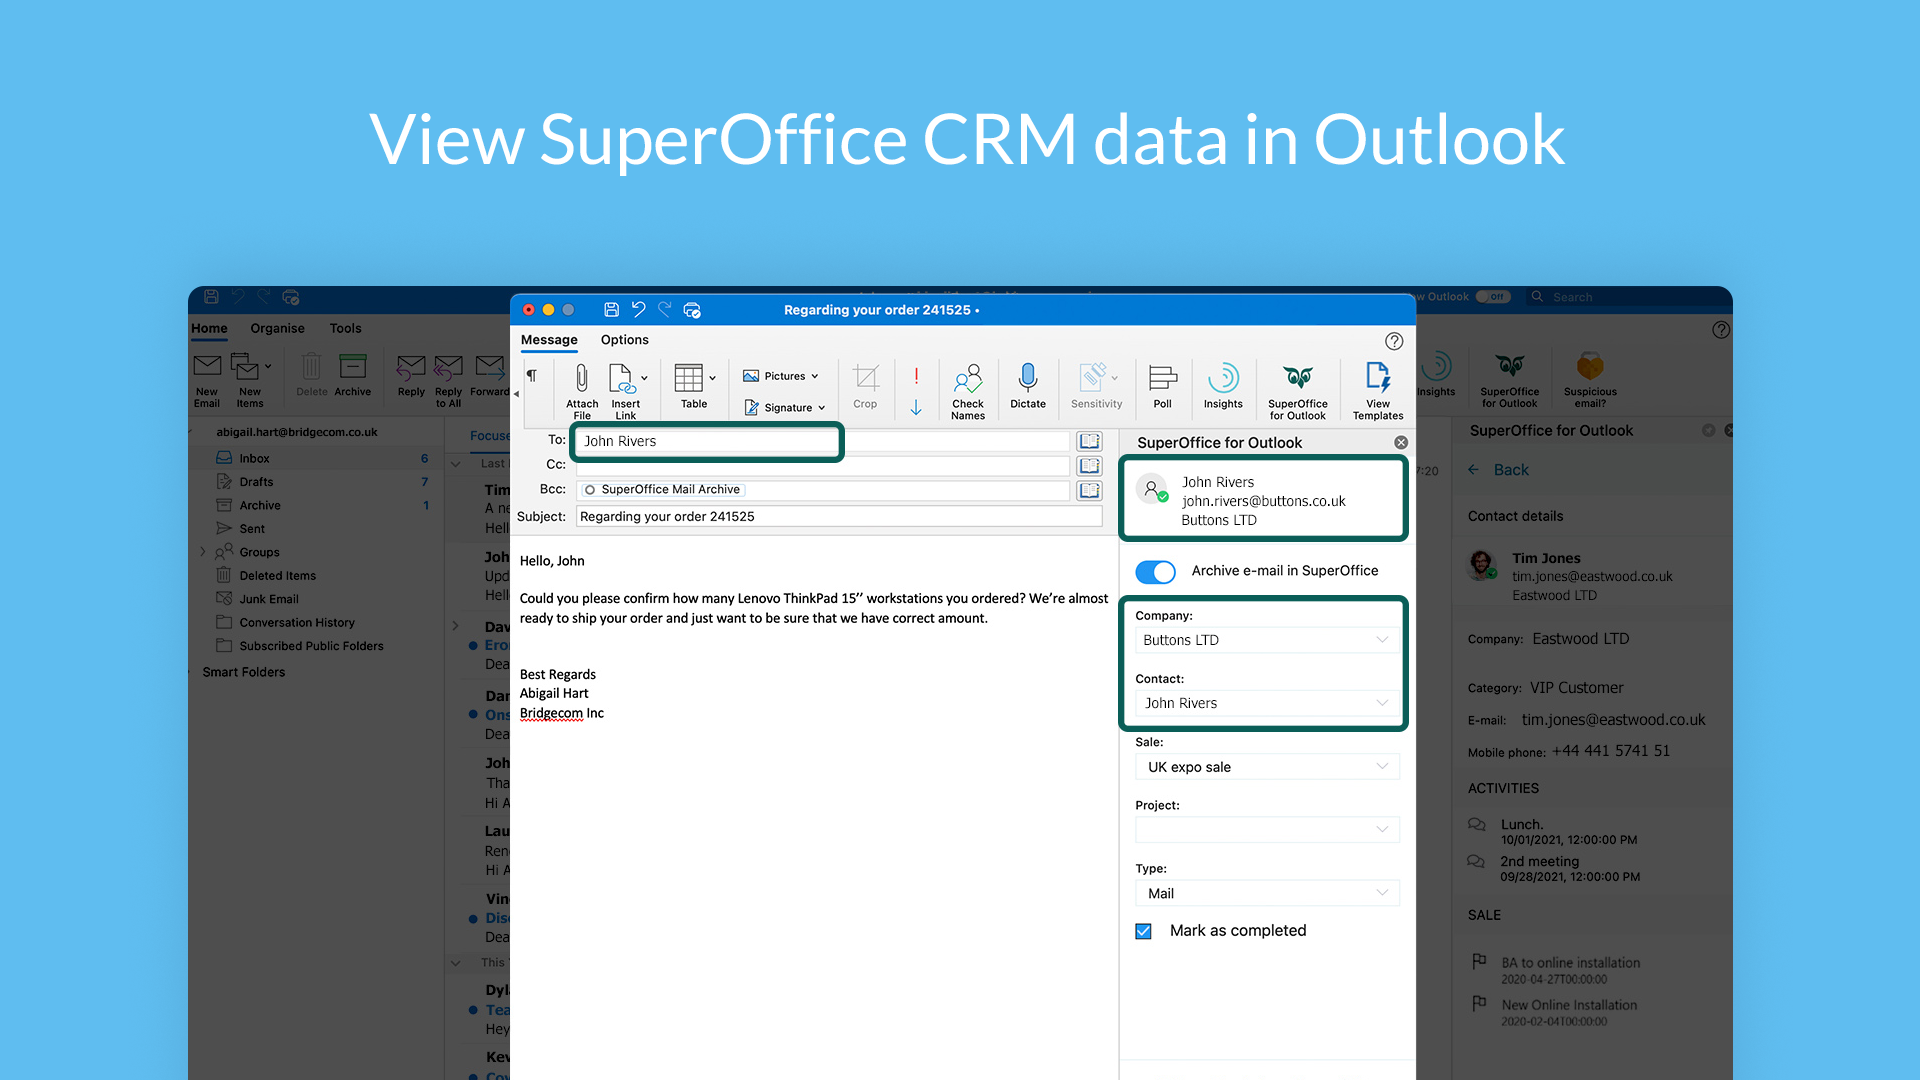 5 View SuperOffice CRM data in Outlook3.png